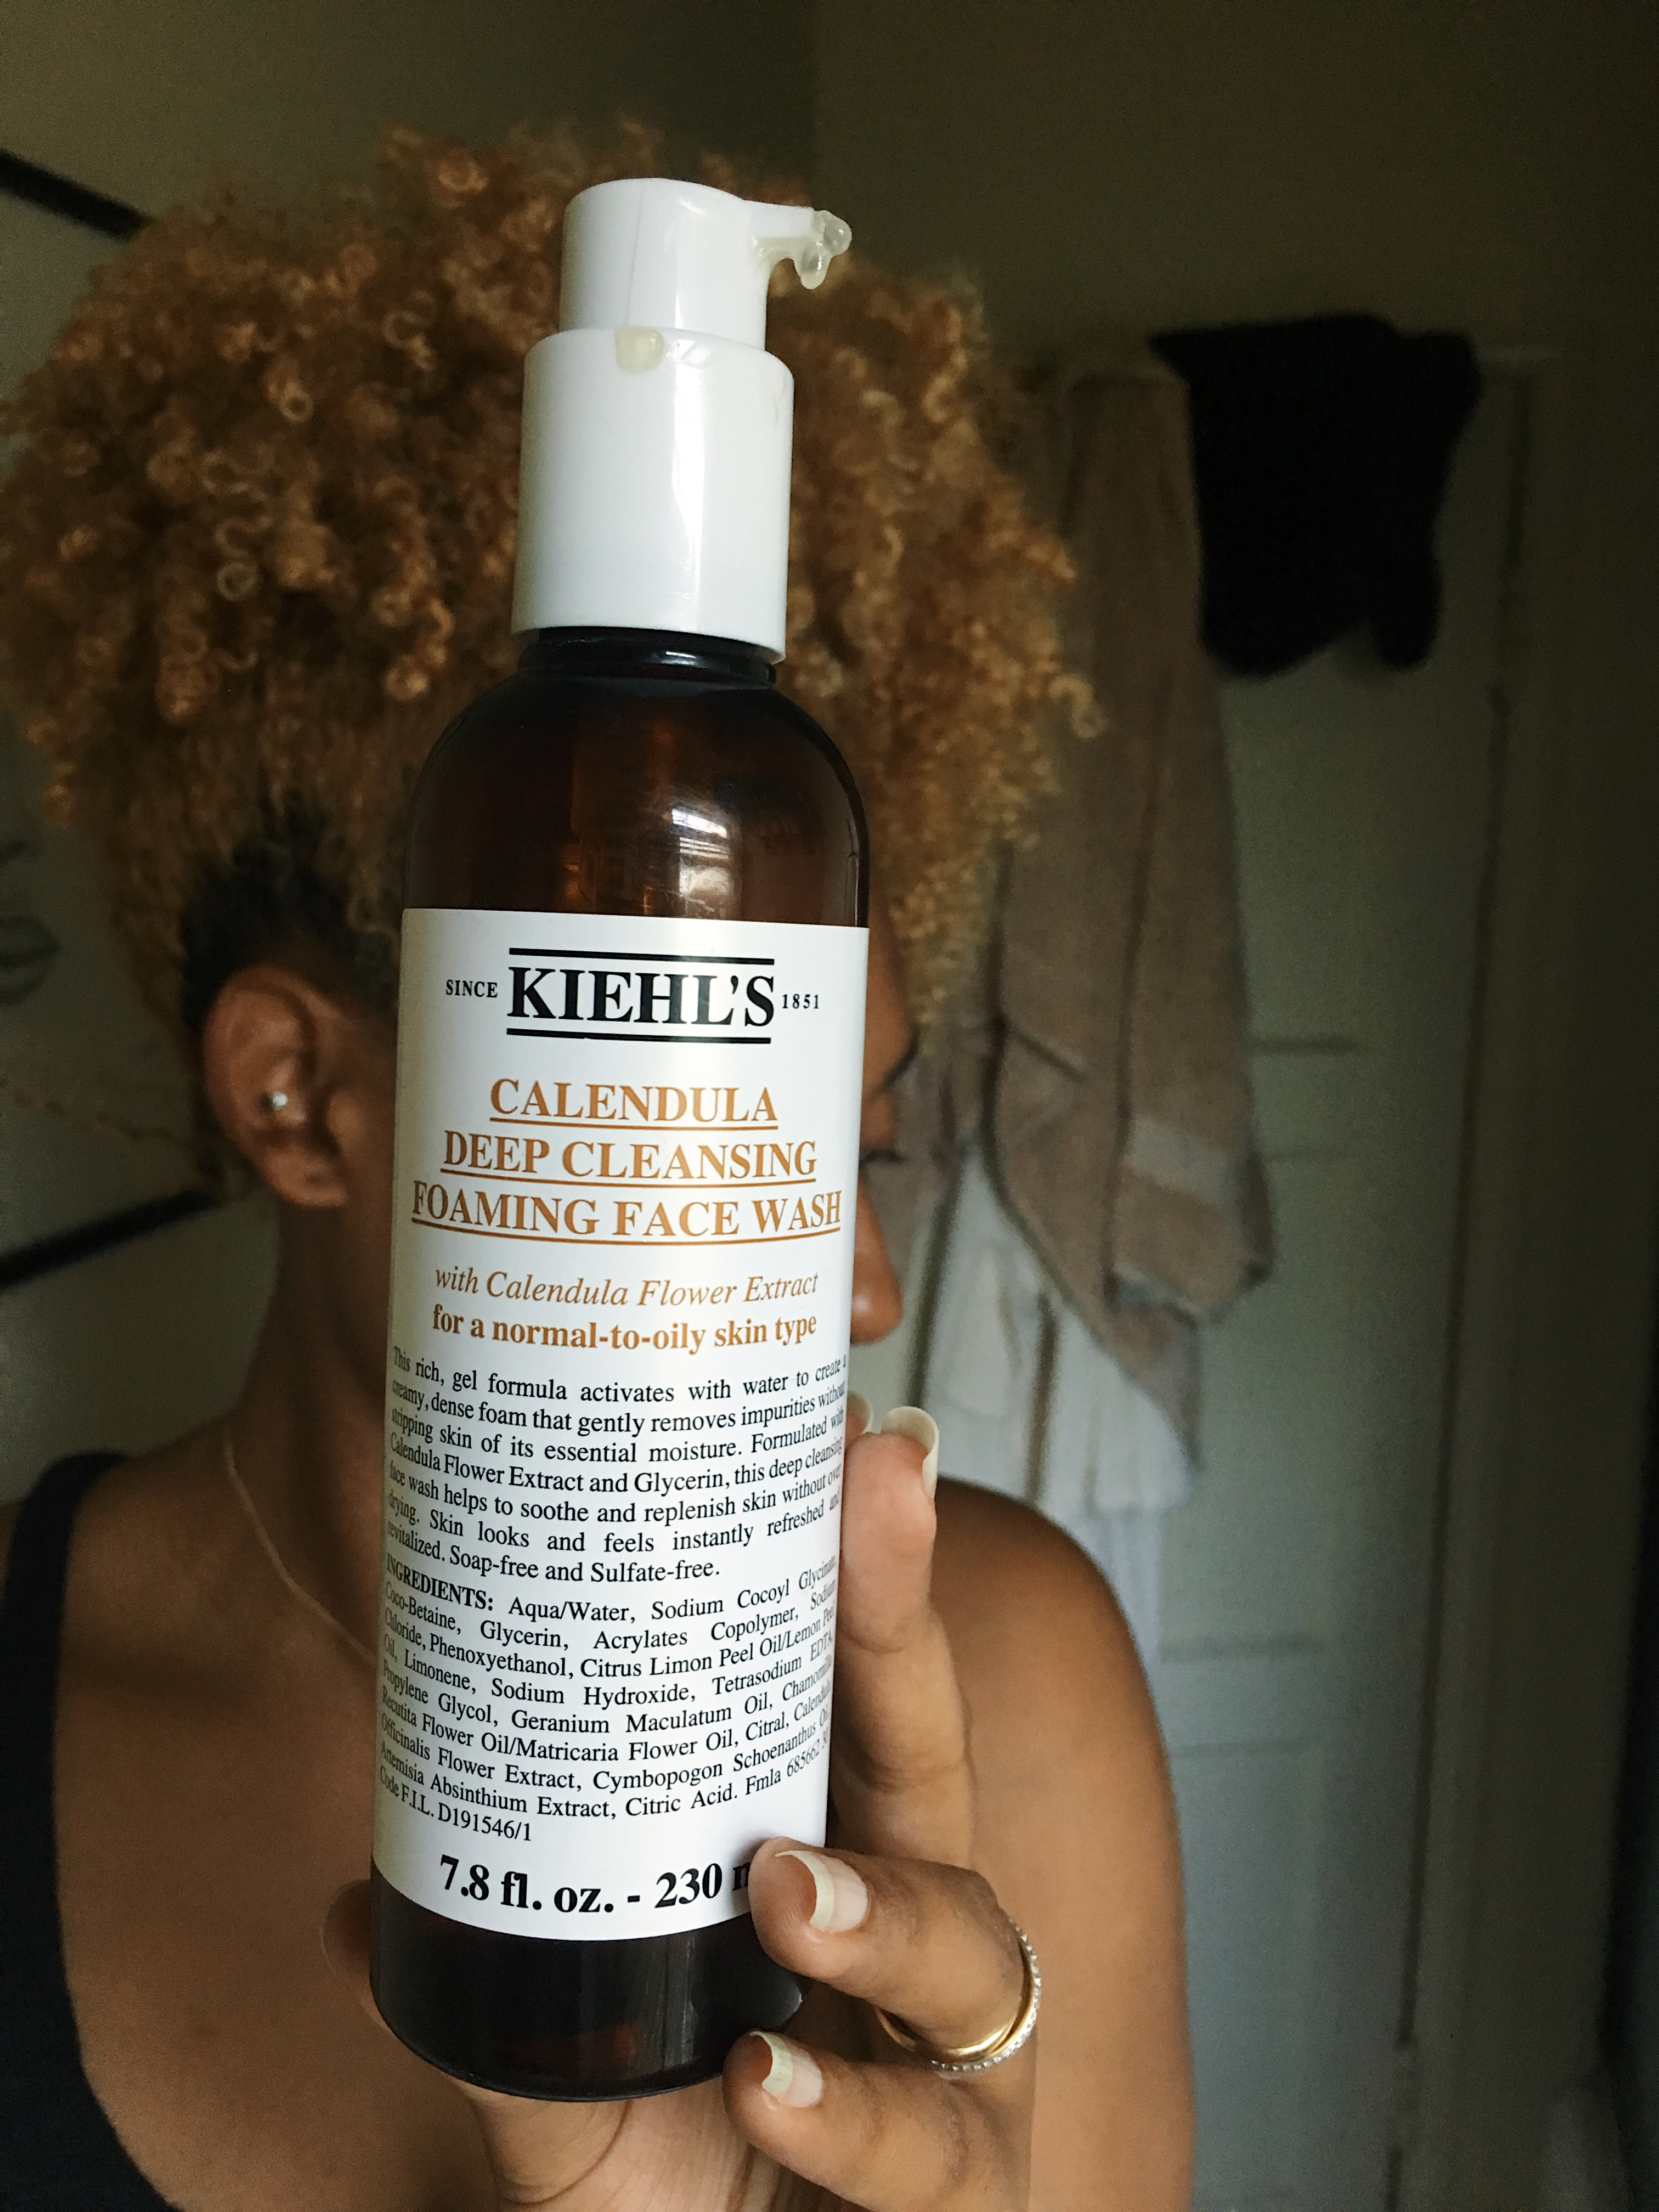 calendula deep cleansing foaming face wash-kiehl's face wash-skincare routine-best face wash-calendula flower